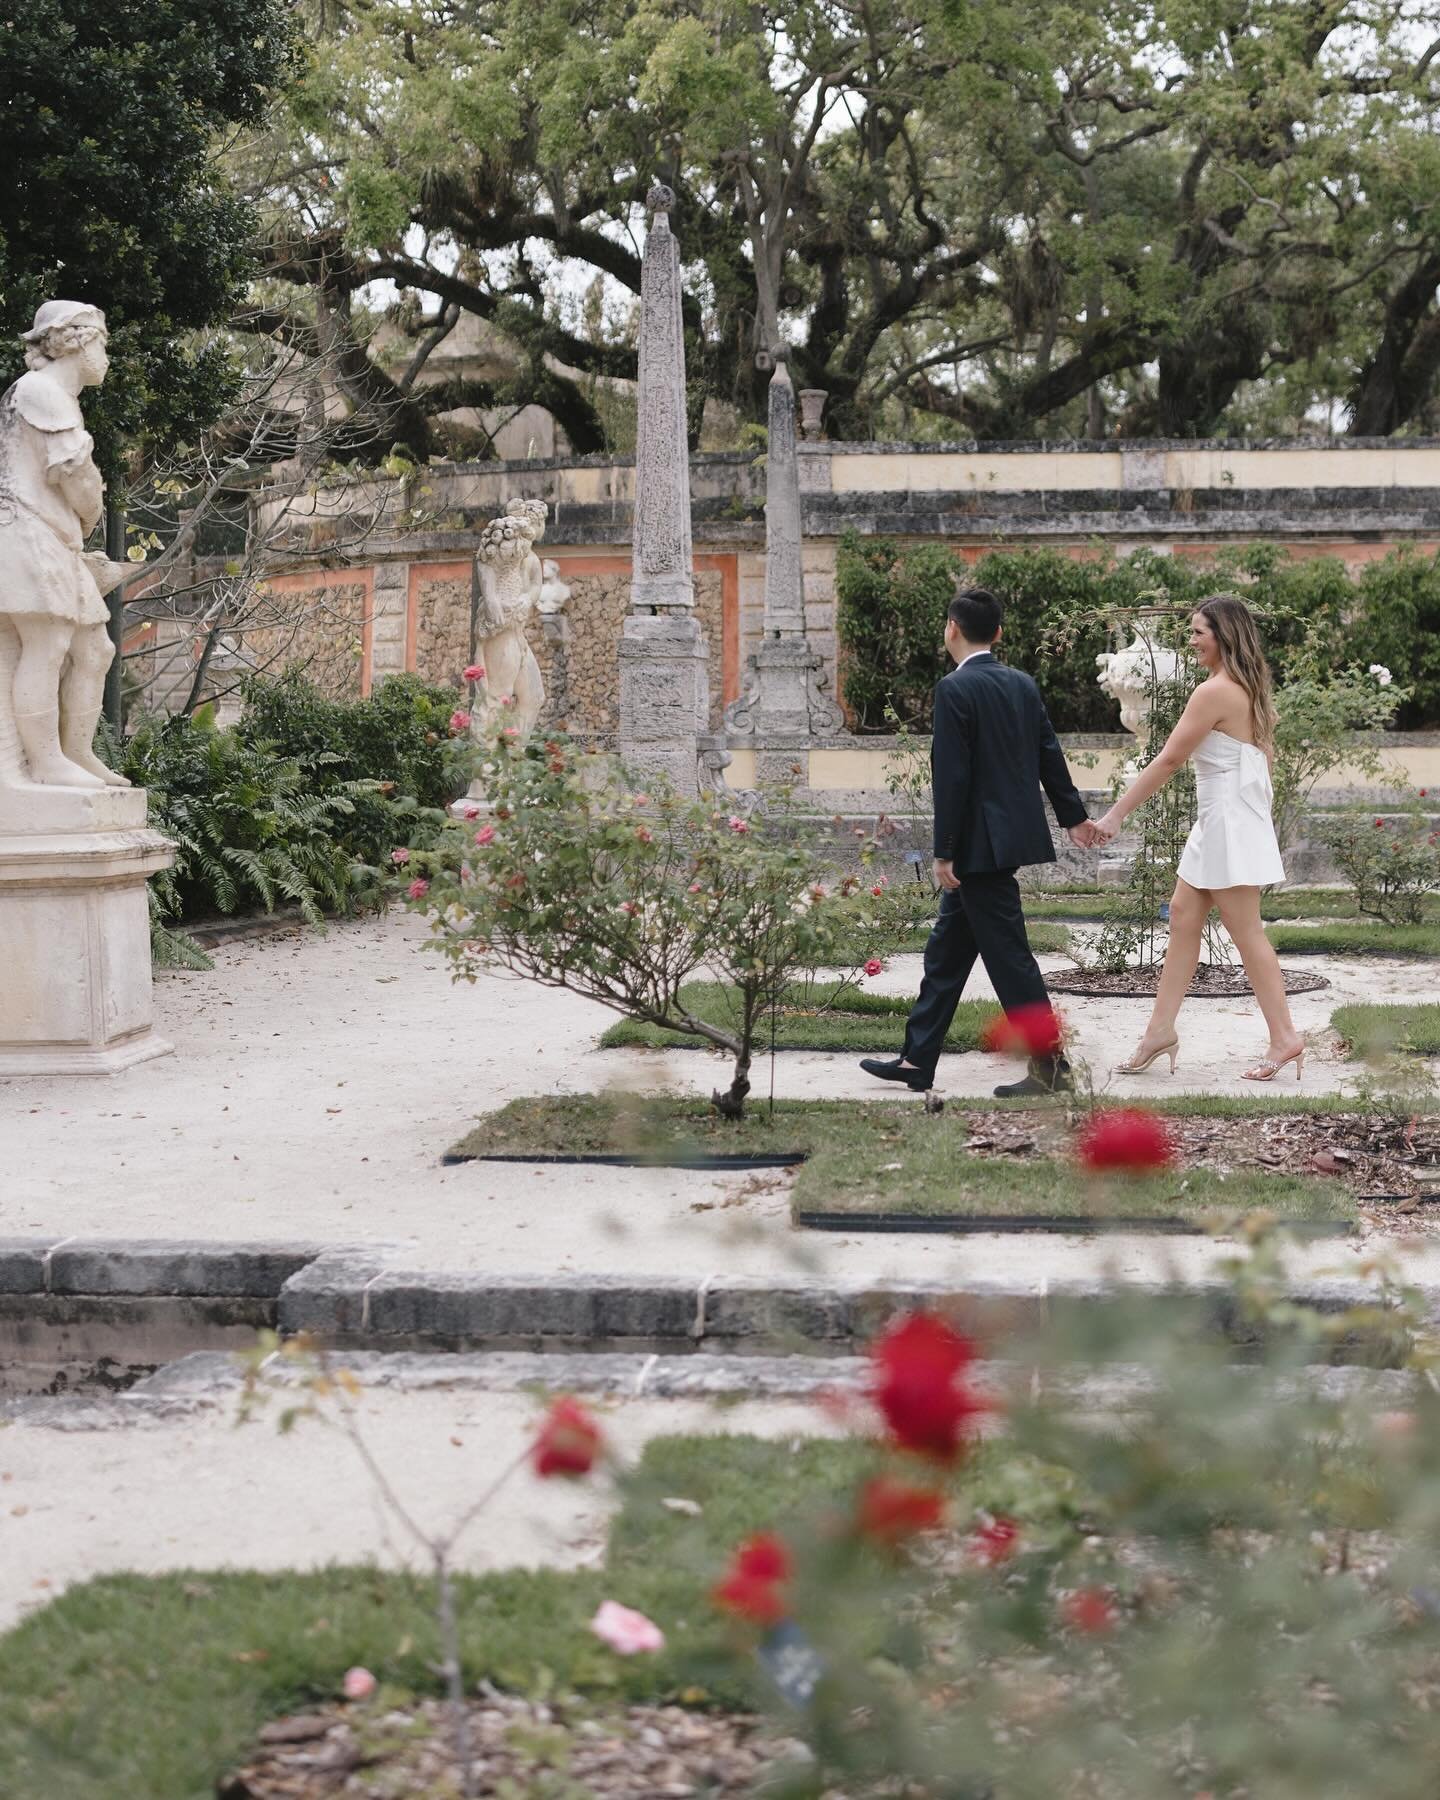 Moments in time captured for Samantha and David&rsquo;s engagement shoot intertwined with the beautiful landscape of the historic Vizcaya Museum and Gardens filled with history, romance, and ornate pieces 
&mdash;&mdash;&mdash;
📷 @laurenalatriste